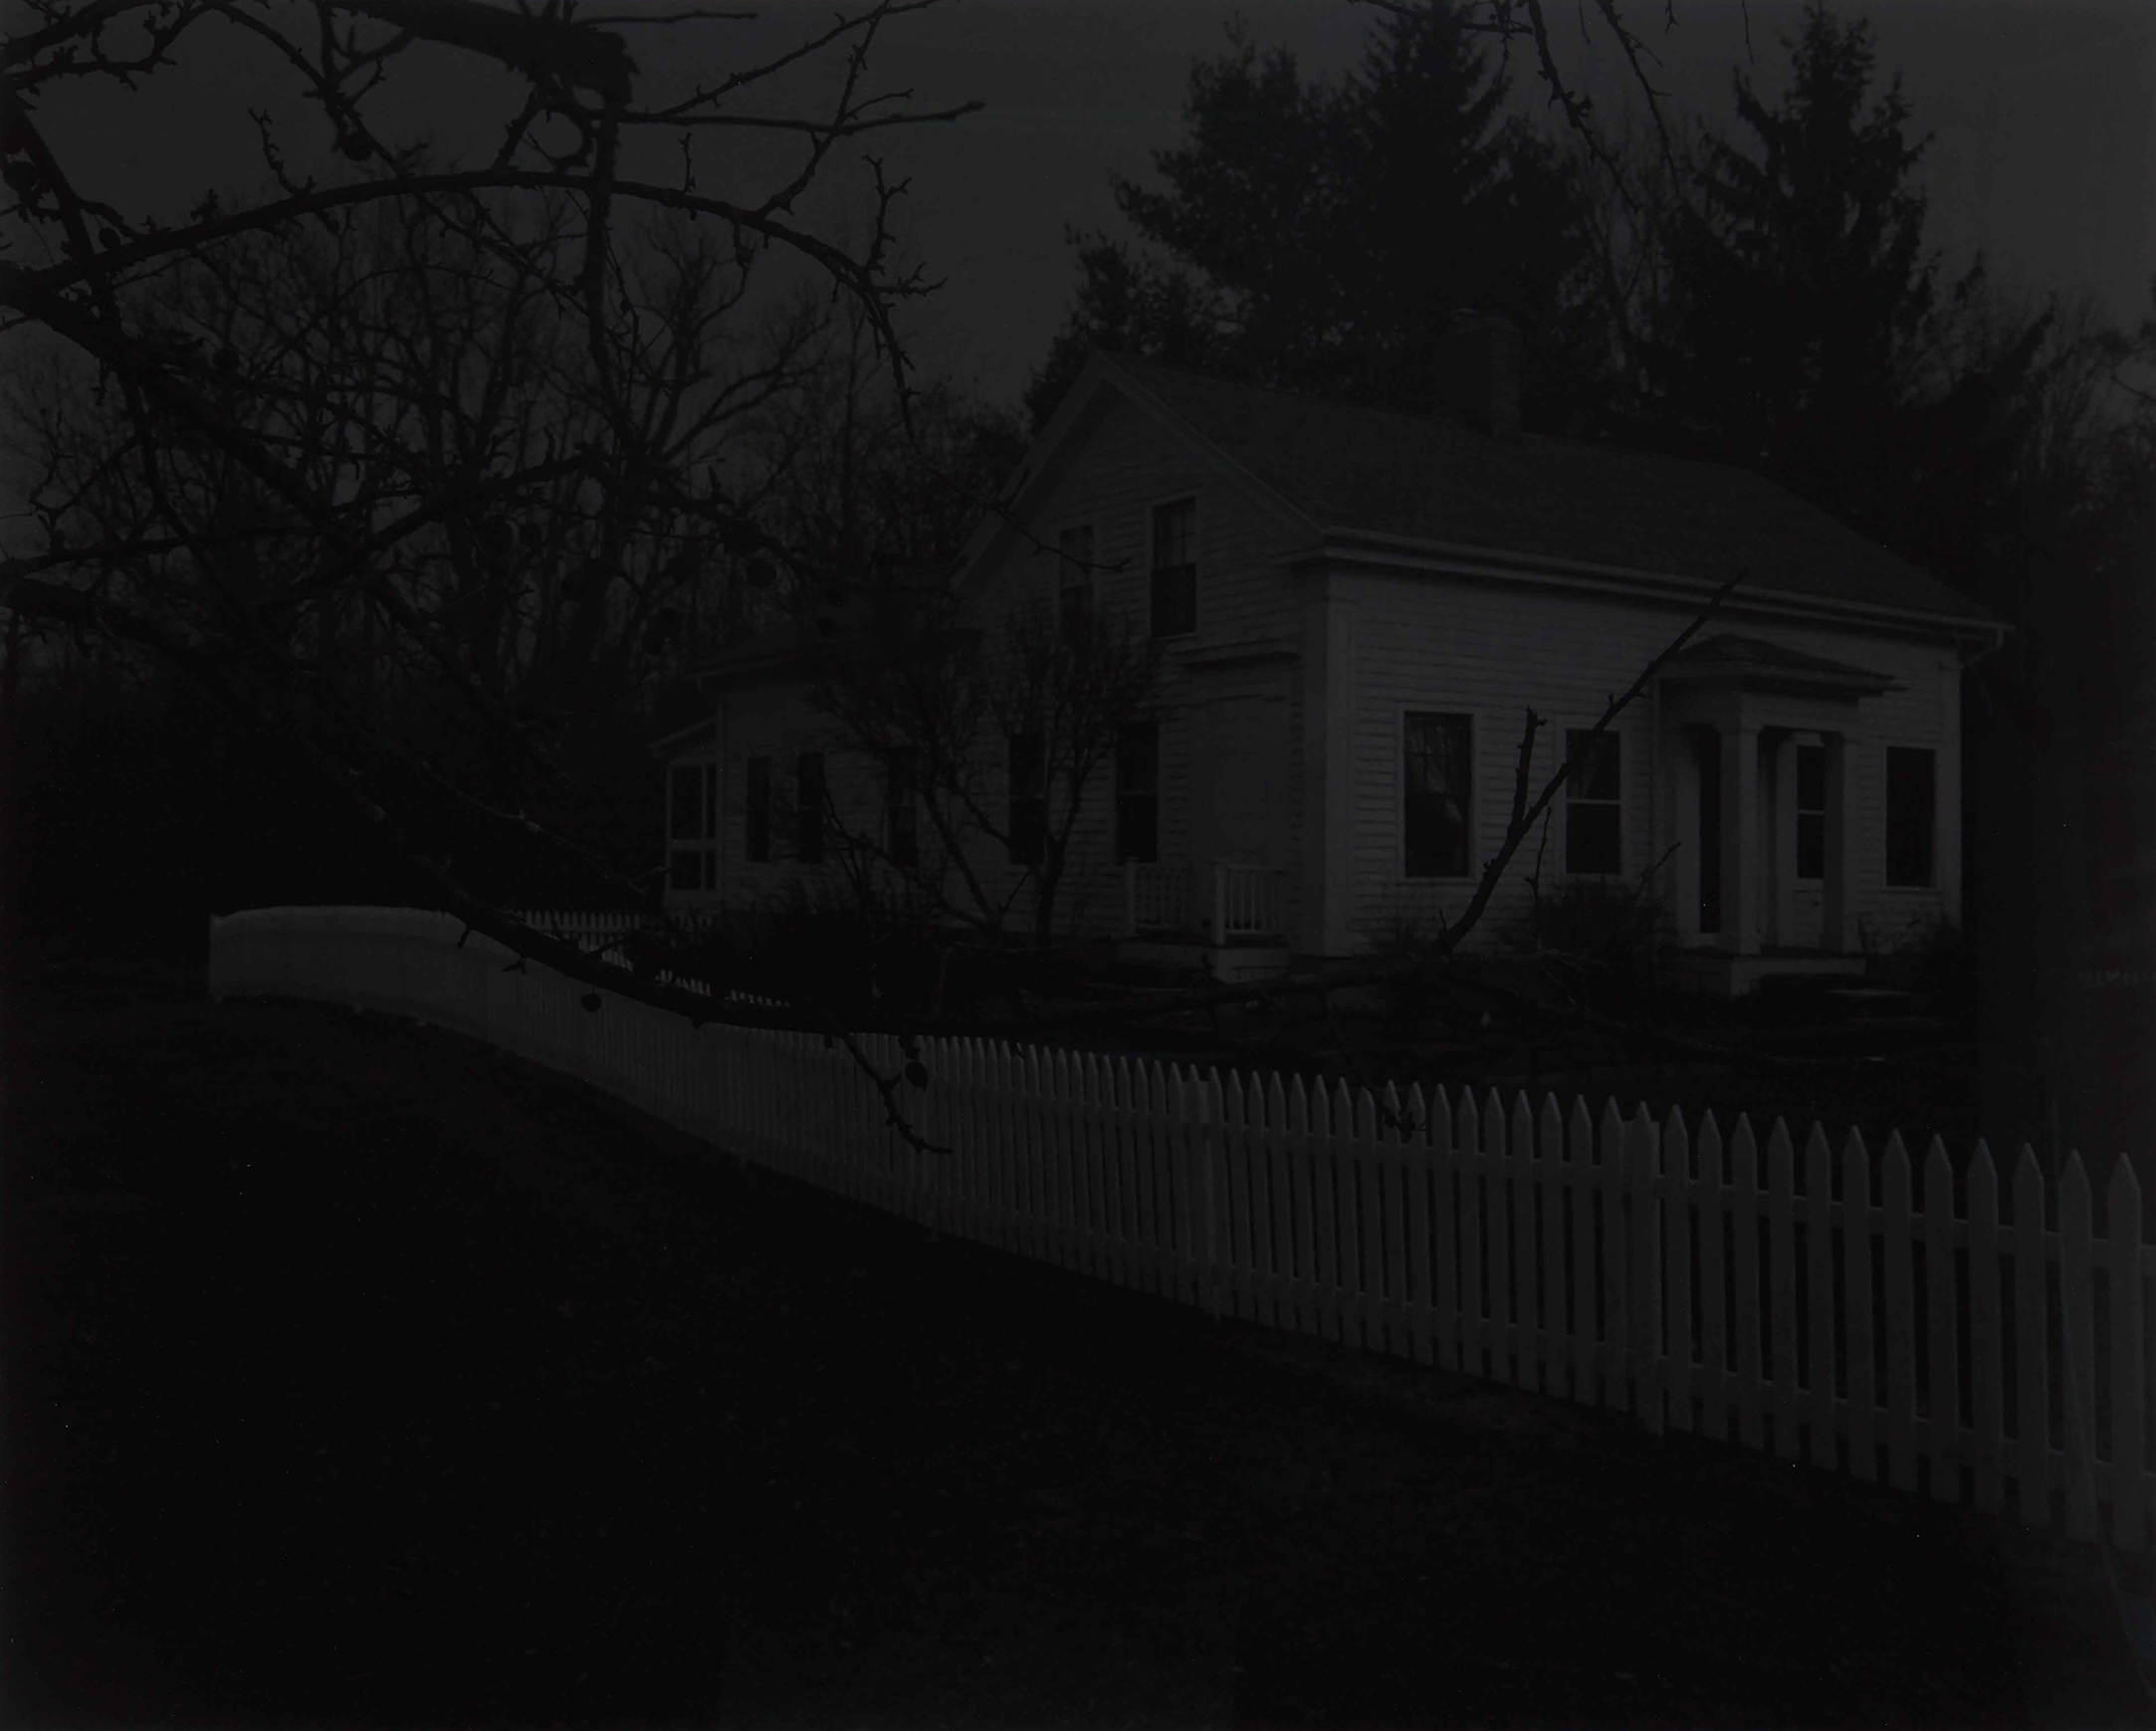 Dawoud Bey, Untitled #20 (Farmhouse and Picket Fence II), 2017. From the series Night Coming Tenderly, Black (2016–17). Gelatin silver print, 121.9 x 149.9 cm. Art Gallery of Ontario, Purchase, with funds from the Photography Curatorial Committee, 2019. © Dawoud Bey 2019/2251.